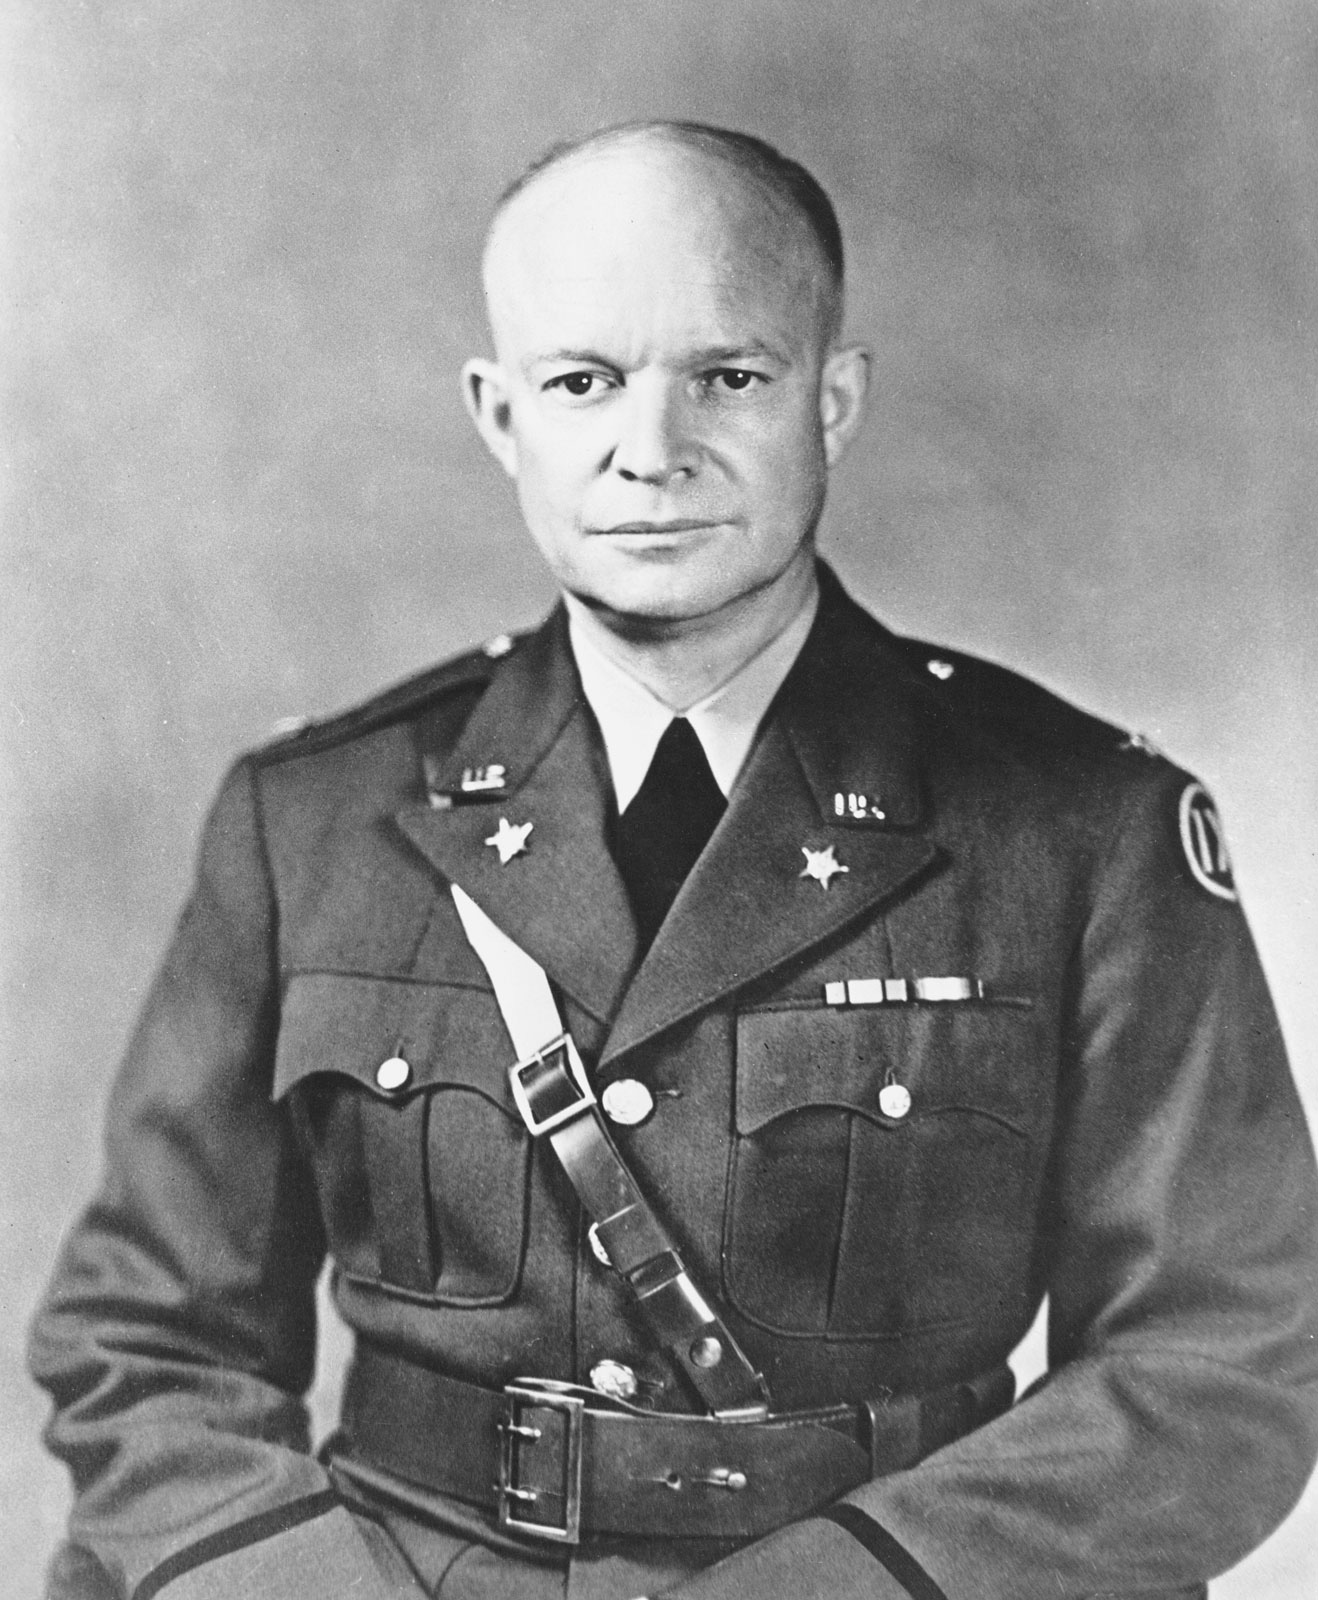 United States General Dwight D. Eisenhower becomes supreme commander of NATO-Europe